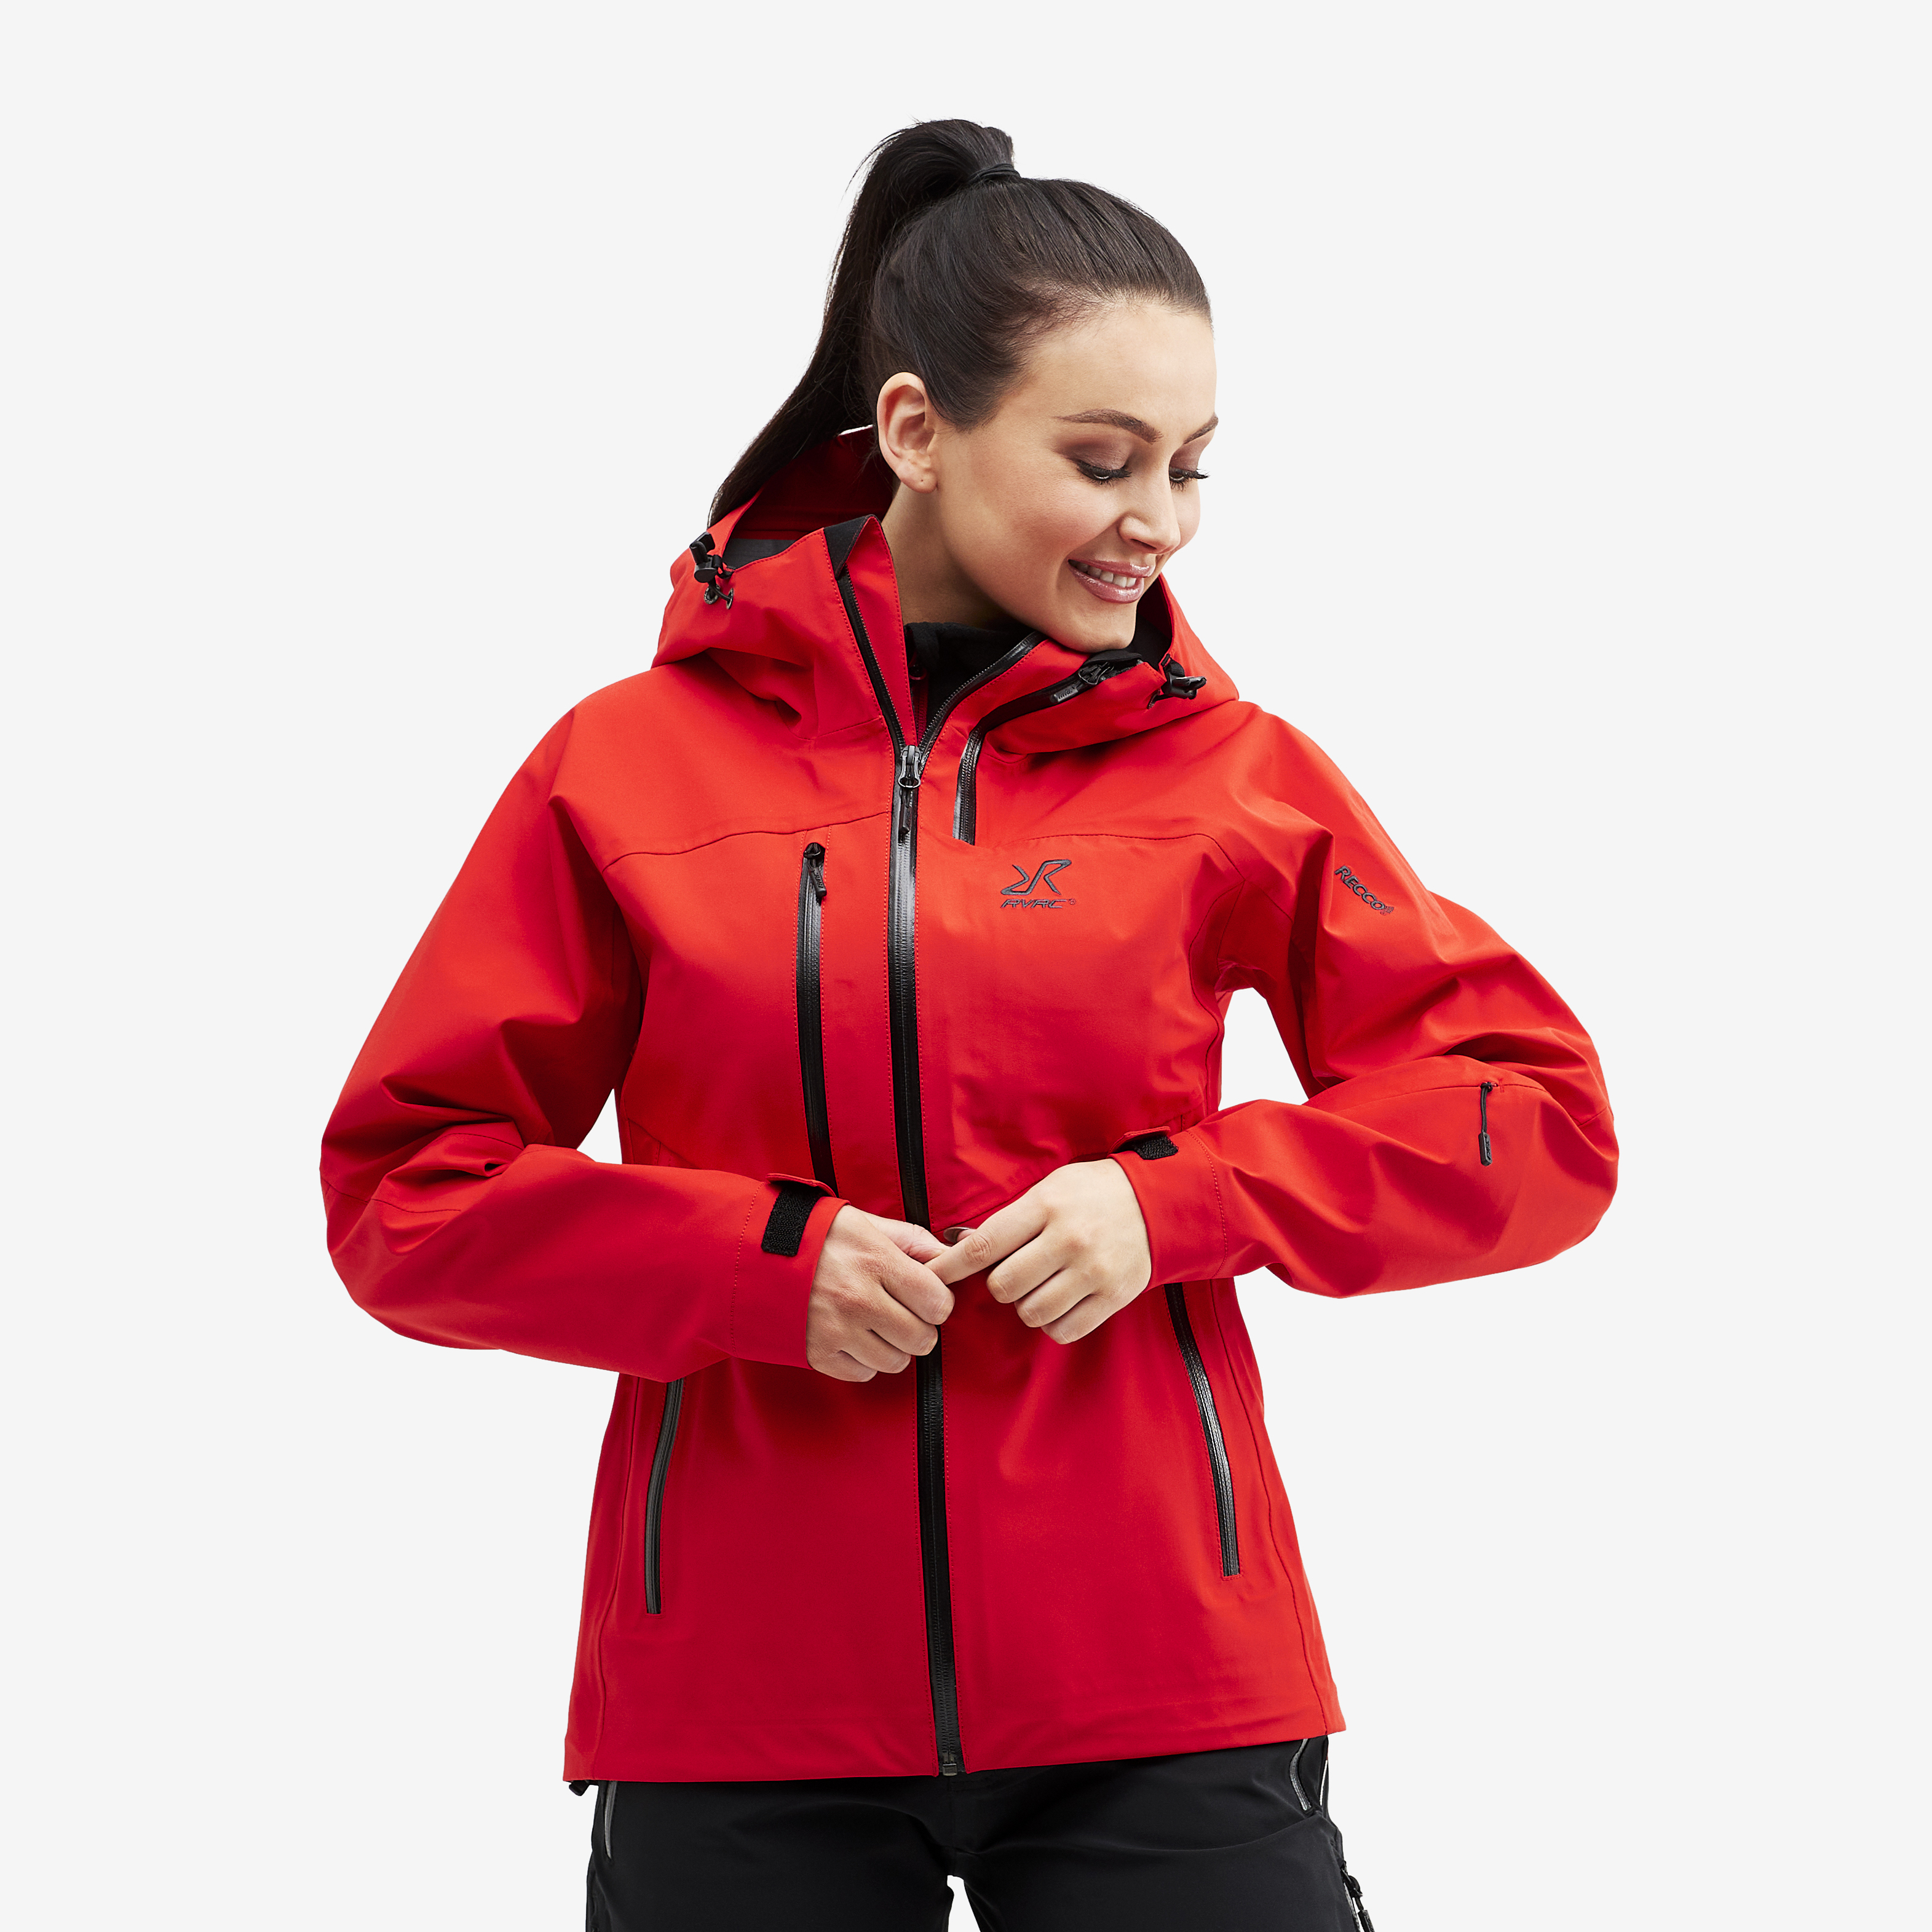 Cyclone Rescue Jacket 2.0 Flame Scarlet Donna